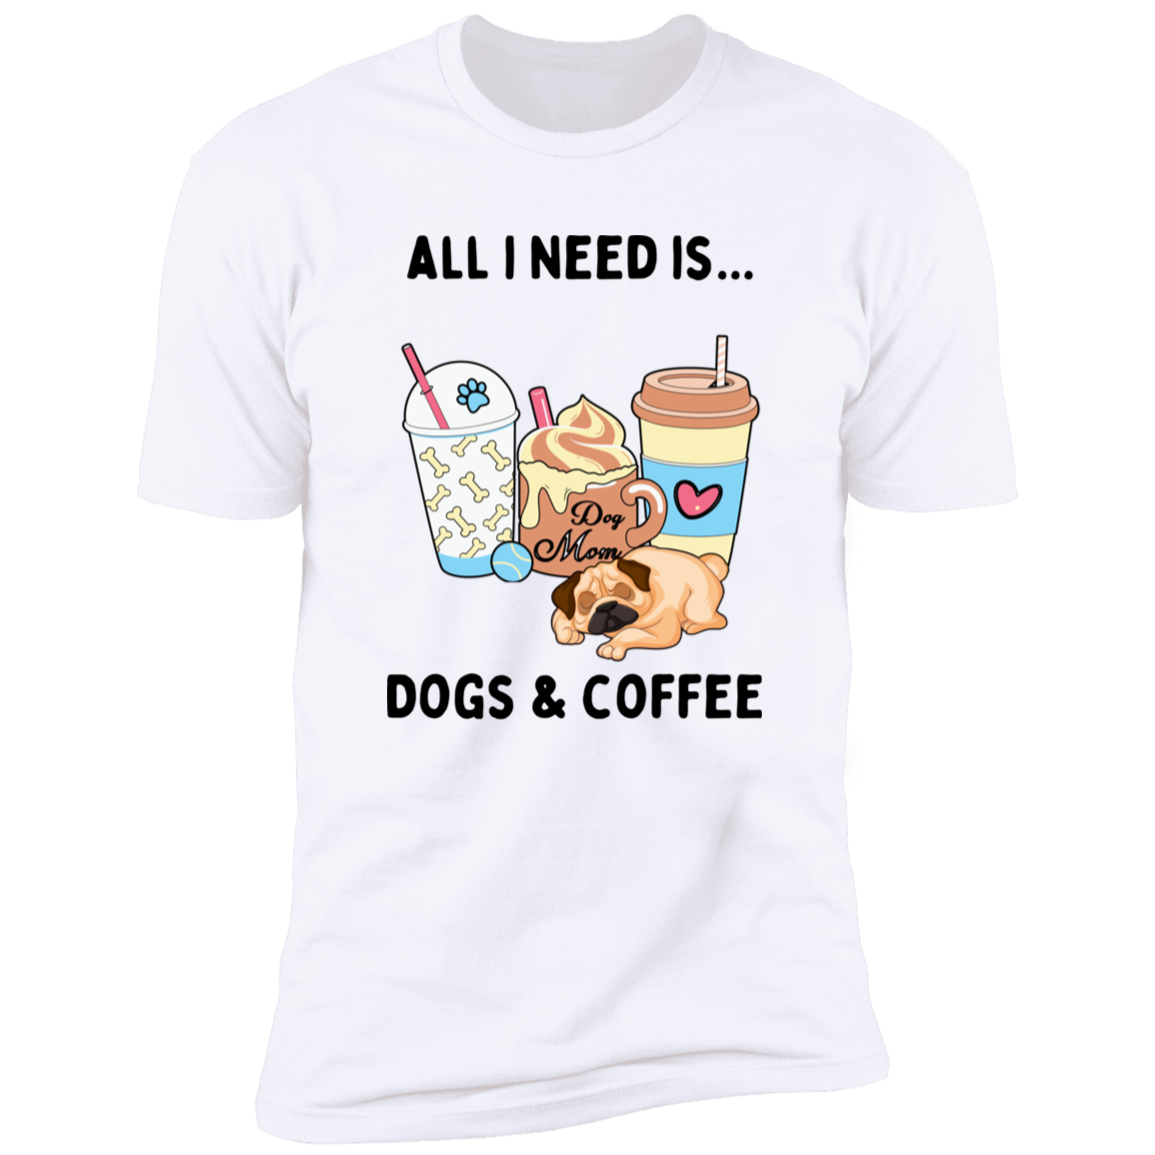 All I Need is Dogs and Coffee, Dog shirt for humas, in white